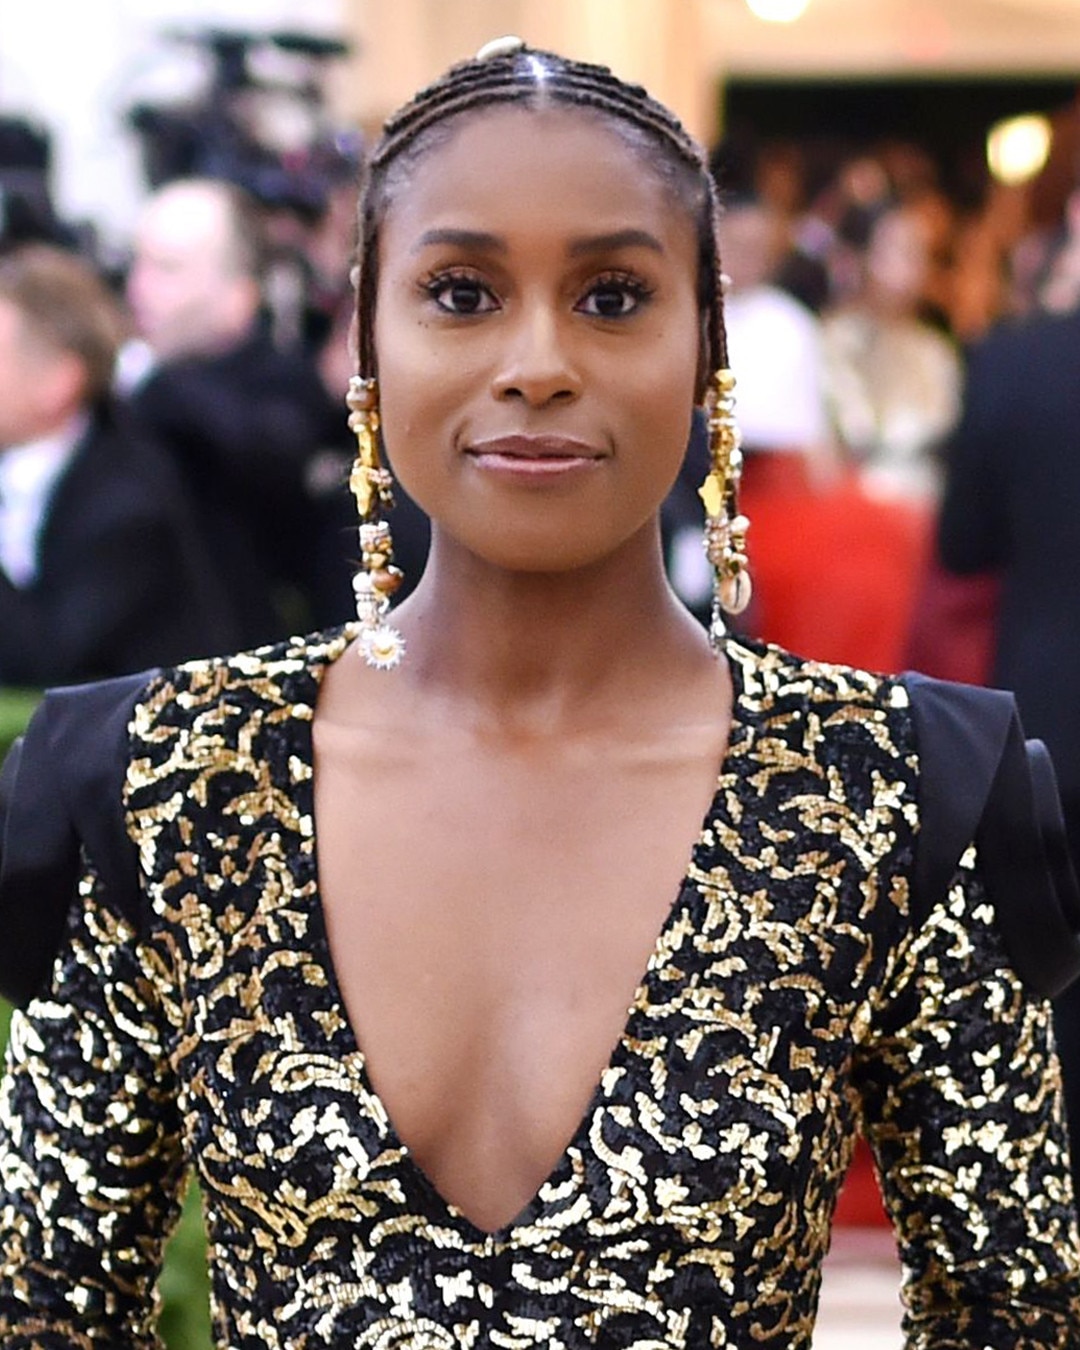 Issa Rae from Best Beauty on the Met Gala 2018 Red Carpet | E! News